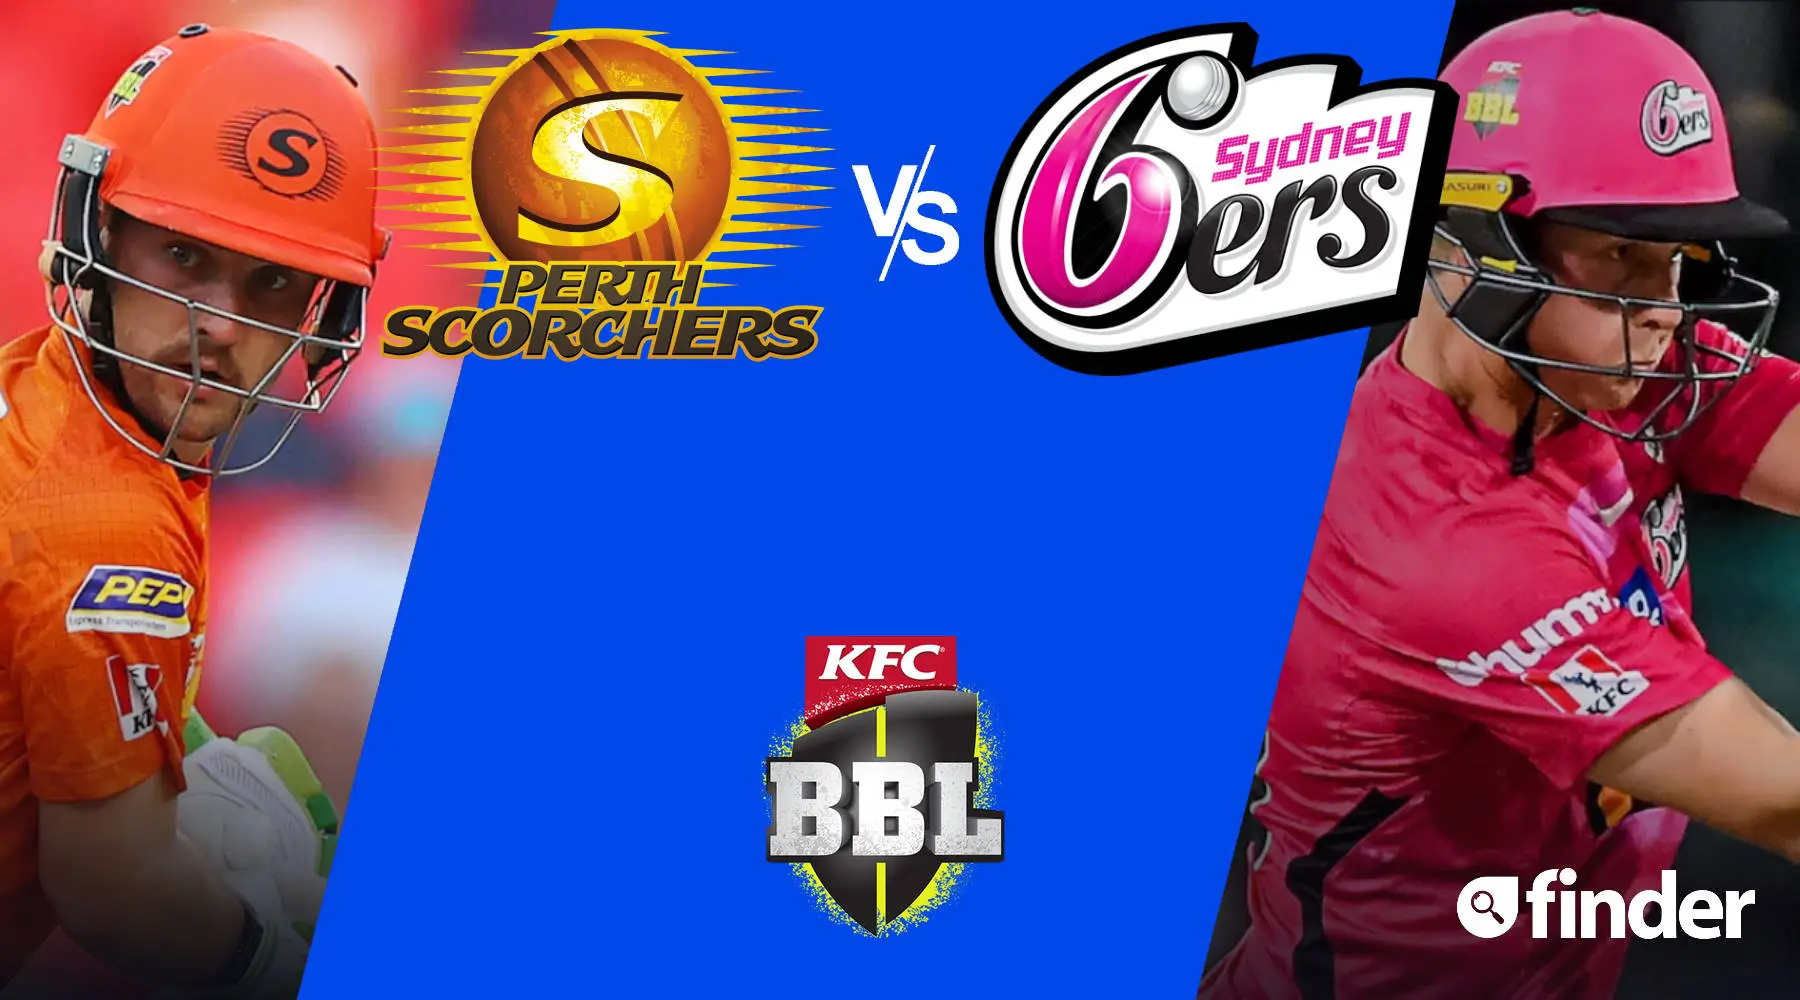 Perth Scorchers vs Sydney Sixers How to watch BBL live